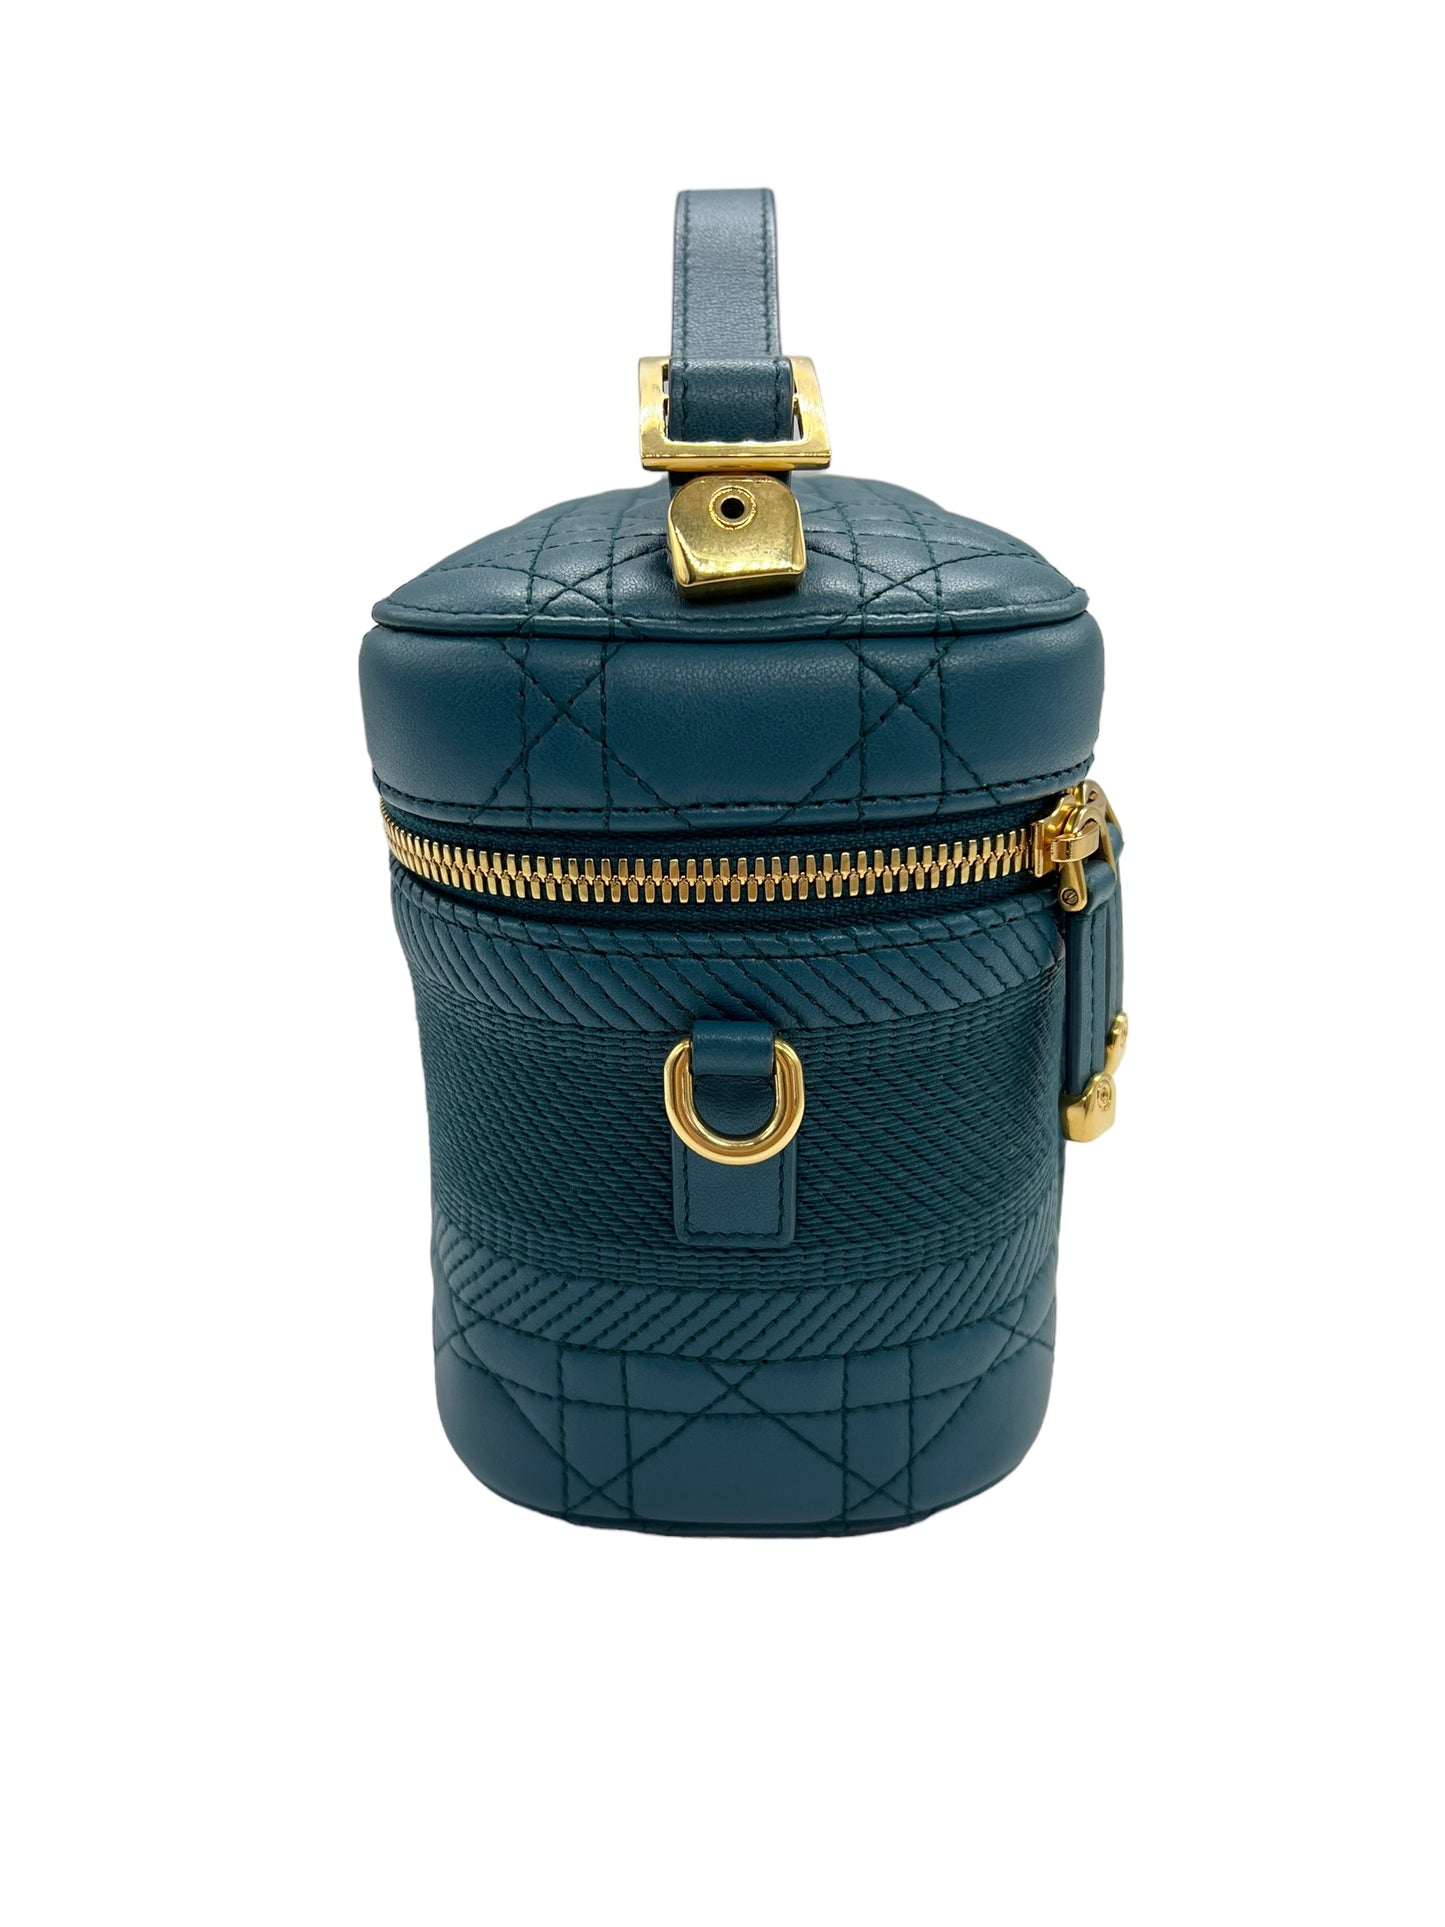 Dior Teal Lambskin Small Cannage Diortravel Vanity Case